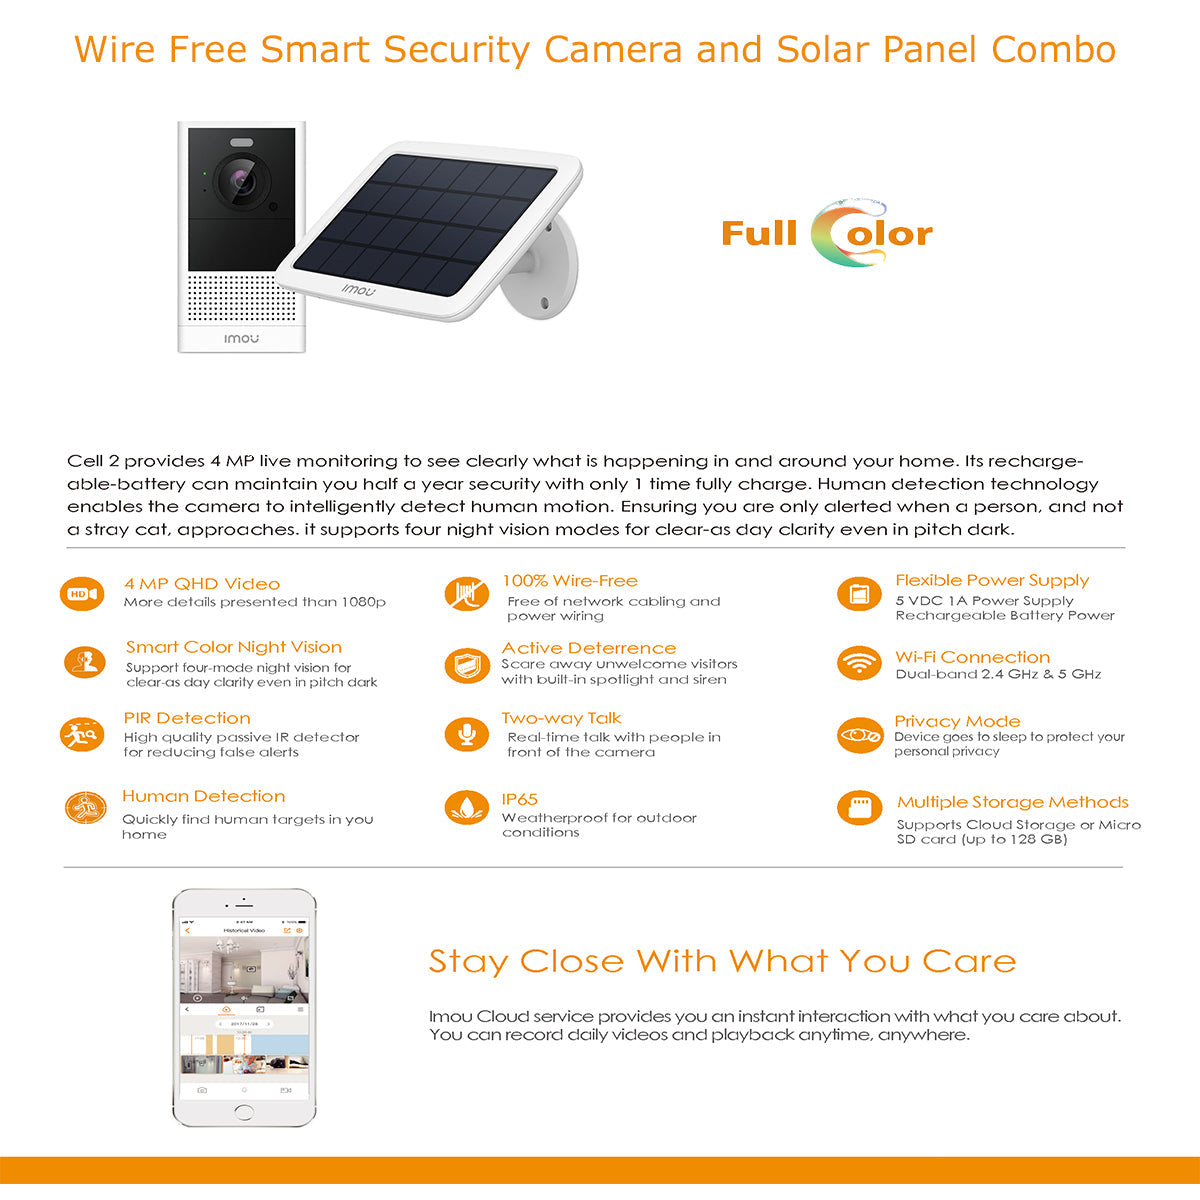 Imou-Cell-2-plus-Solar-Panel-plus-SanDisk-Ultra-64GB-Micro-SDXC-Card-Product-Features2-CC473-6-CH54-2-PS470